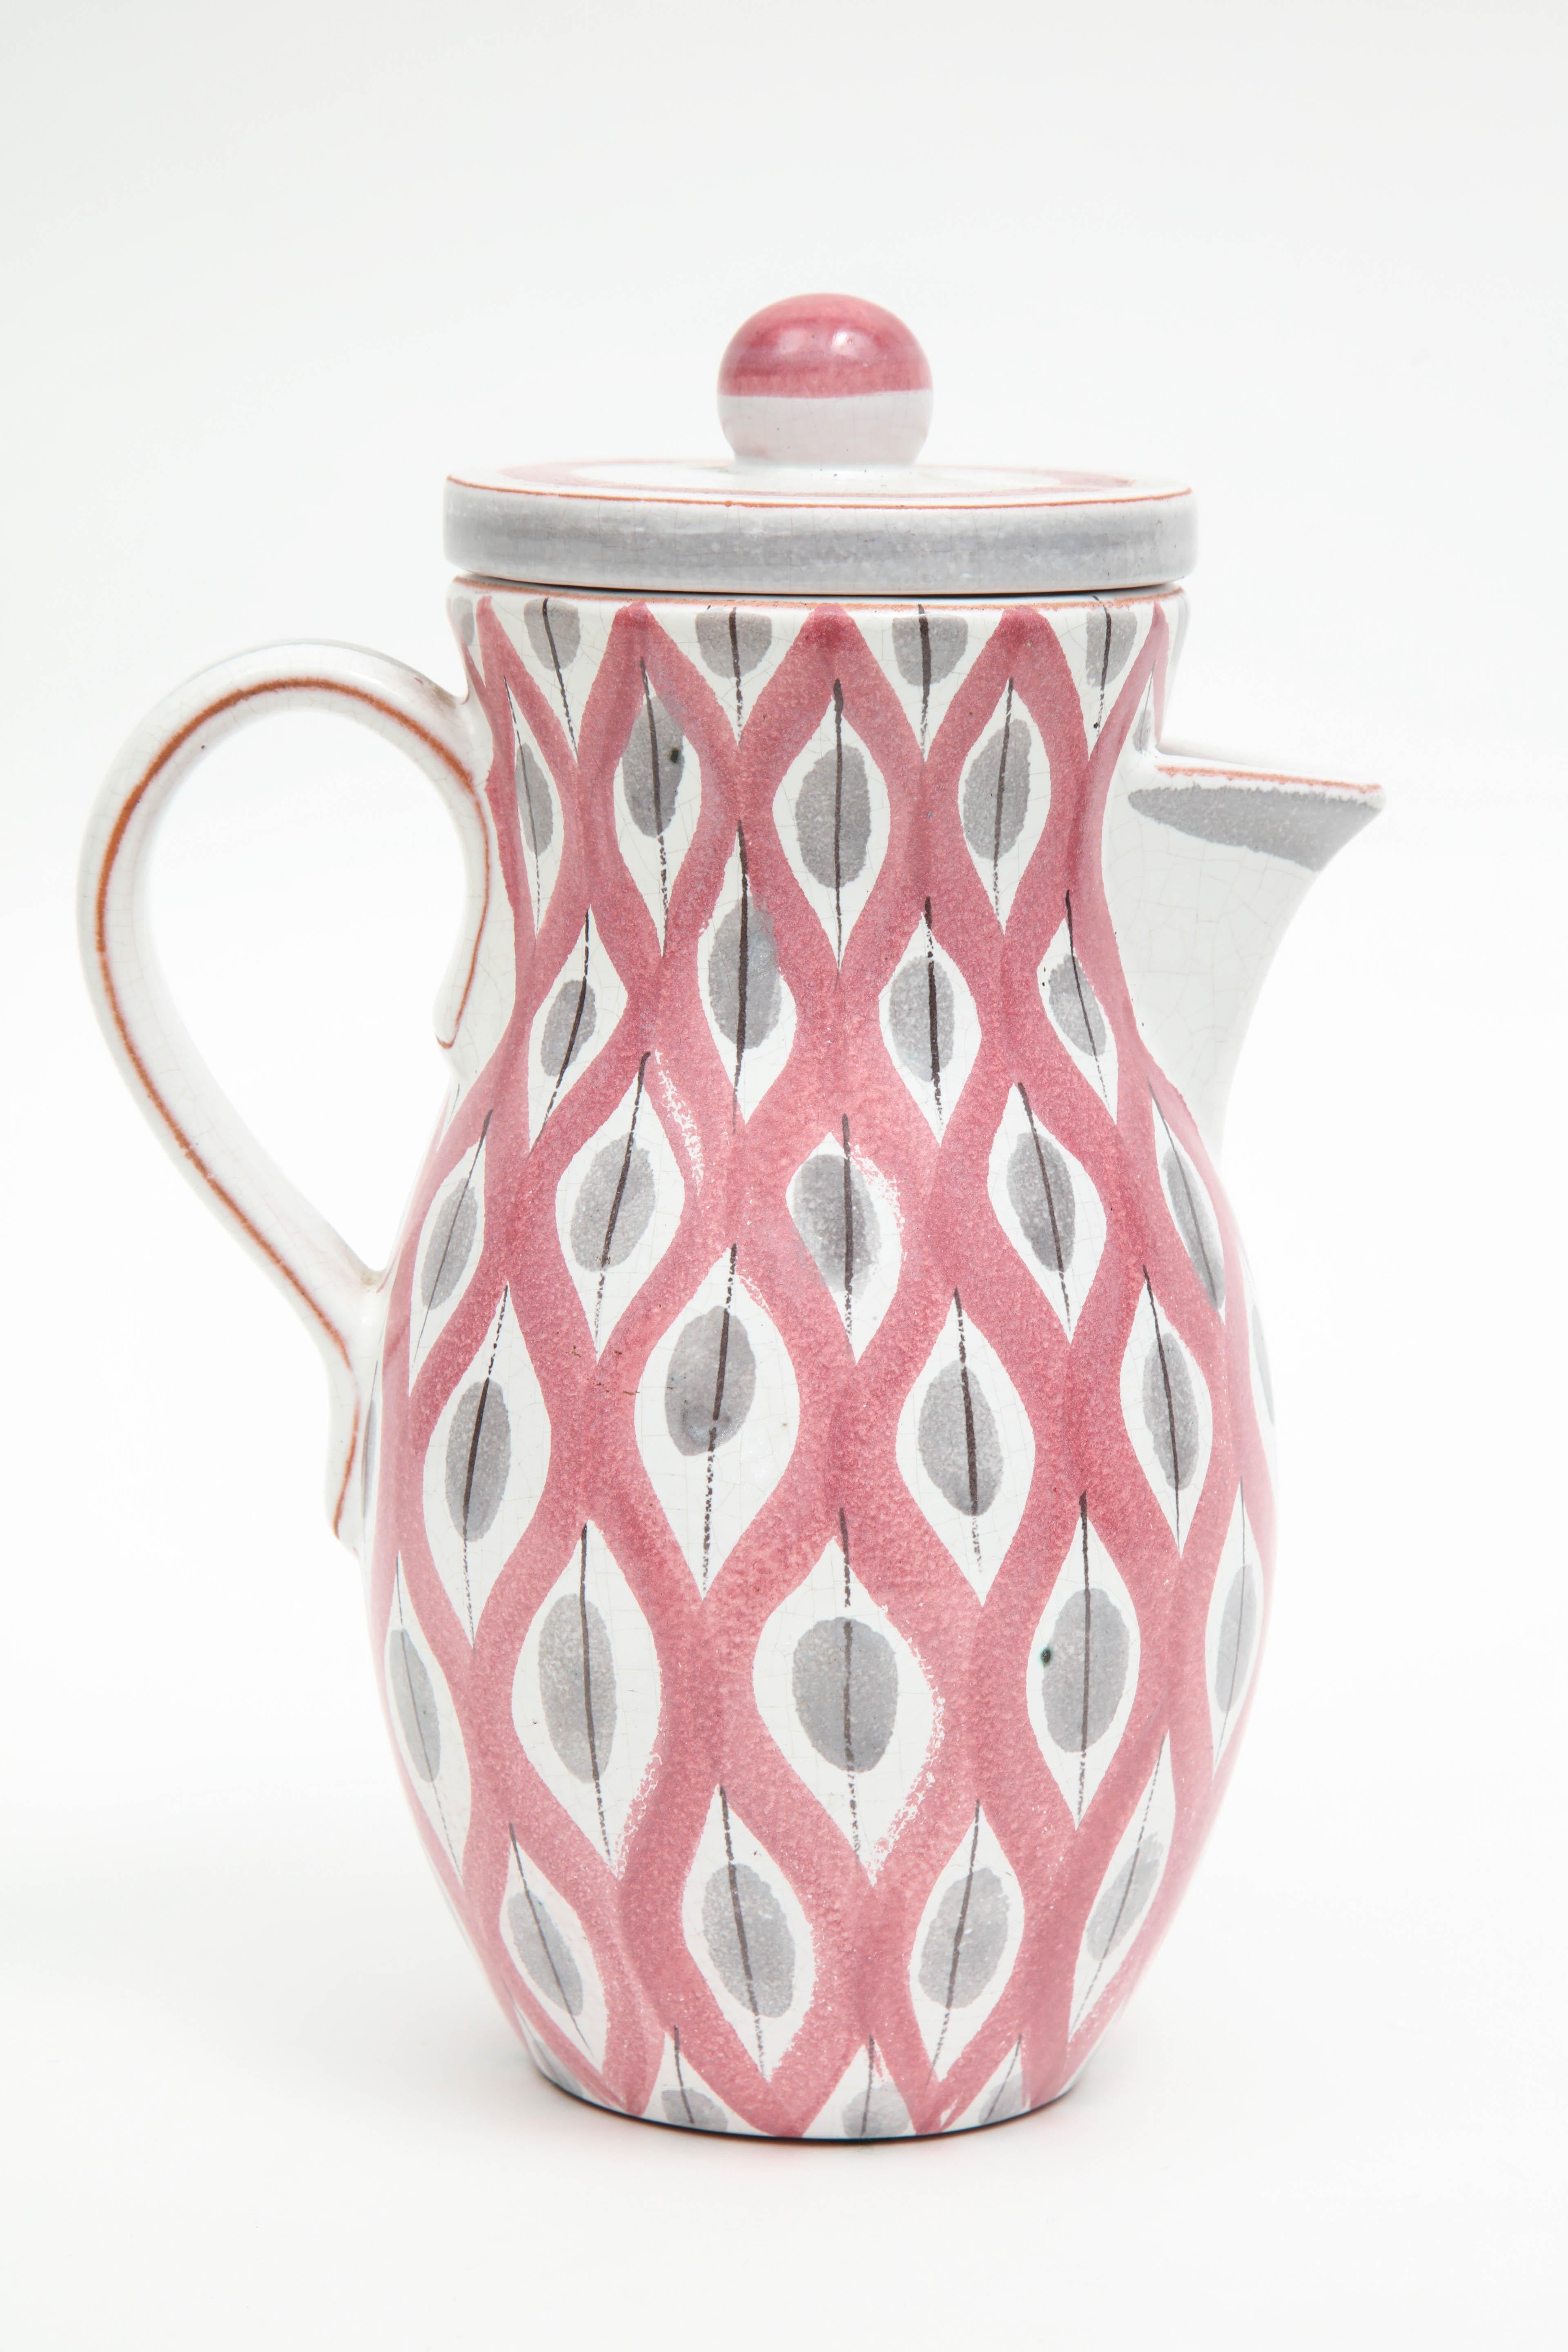 Hand-Painted Pitcher by Stig Lindberg, Scandinavian, Midcentury, Red, Gray and White, C 1950 For Sale